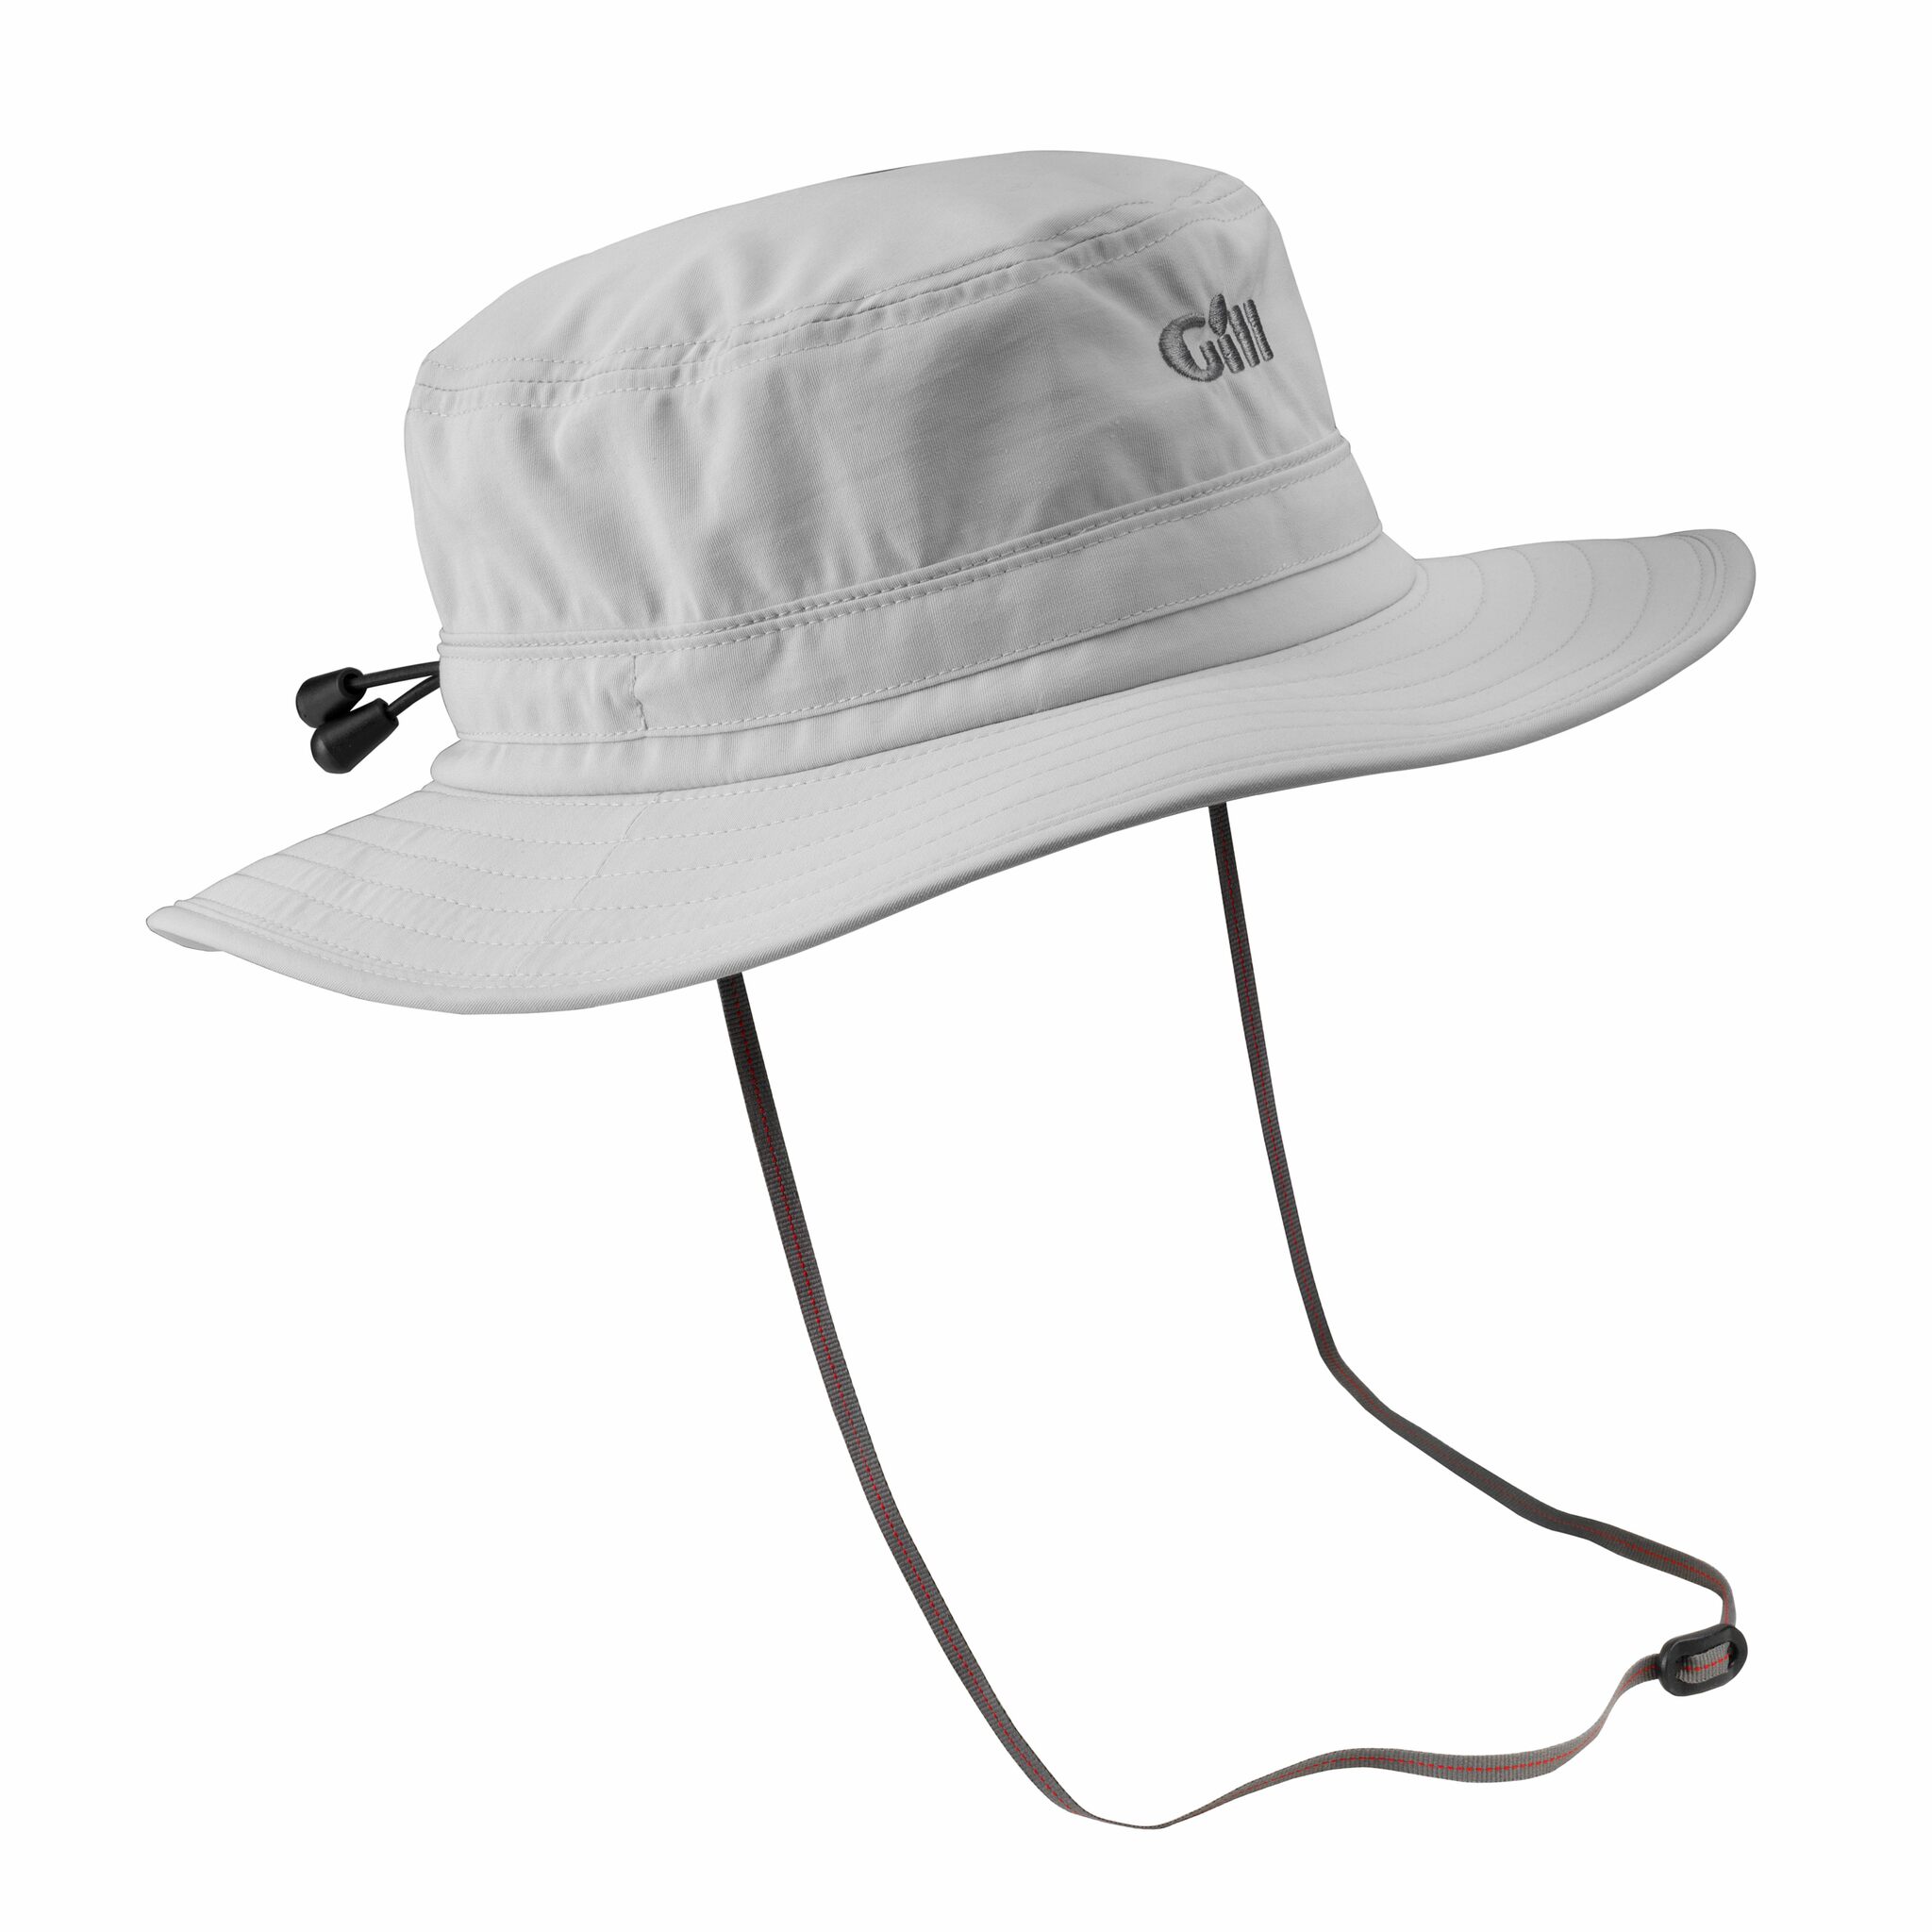 Gill technical sailing hat